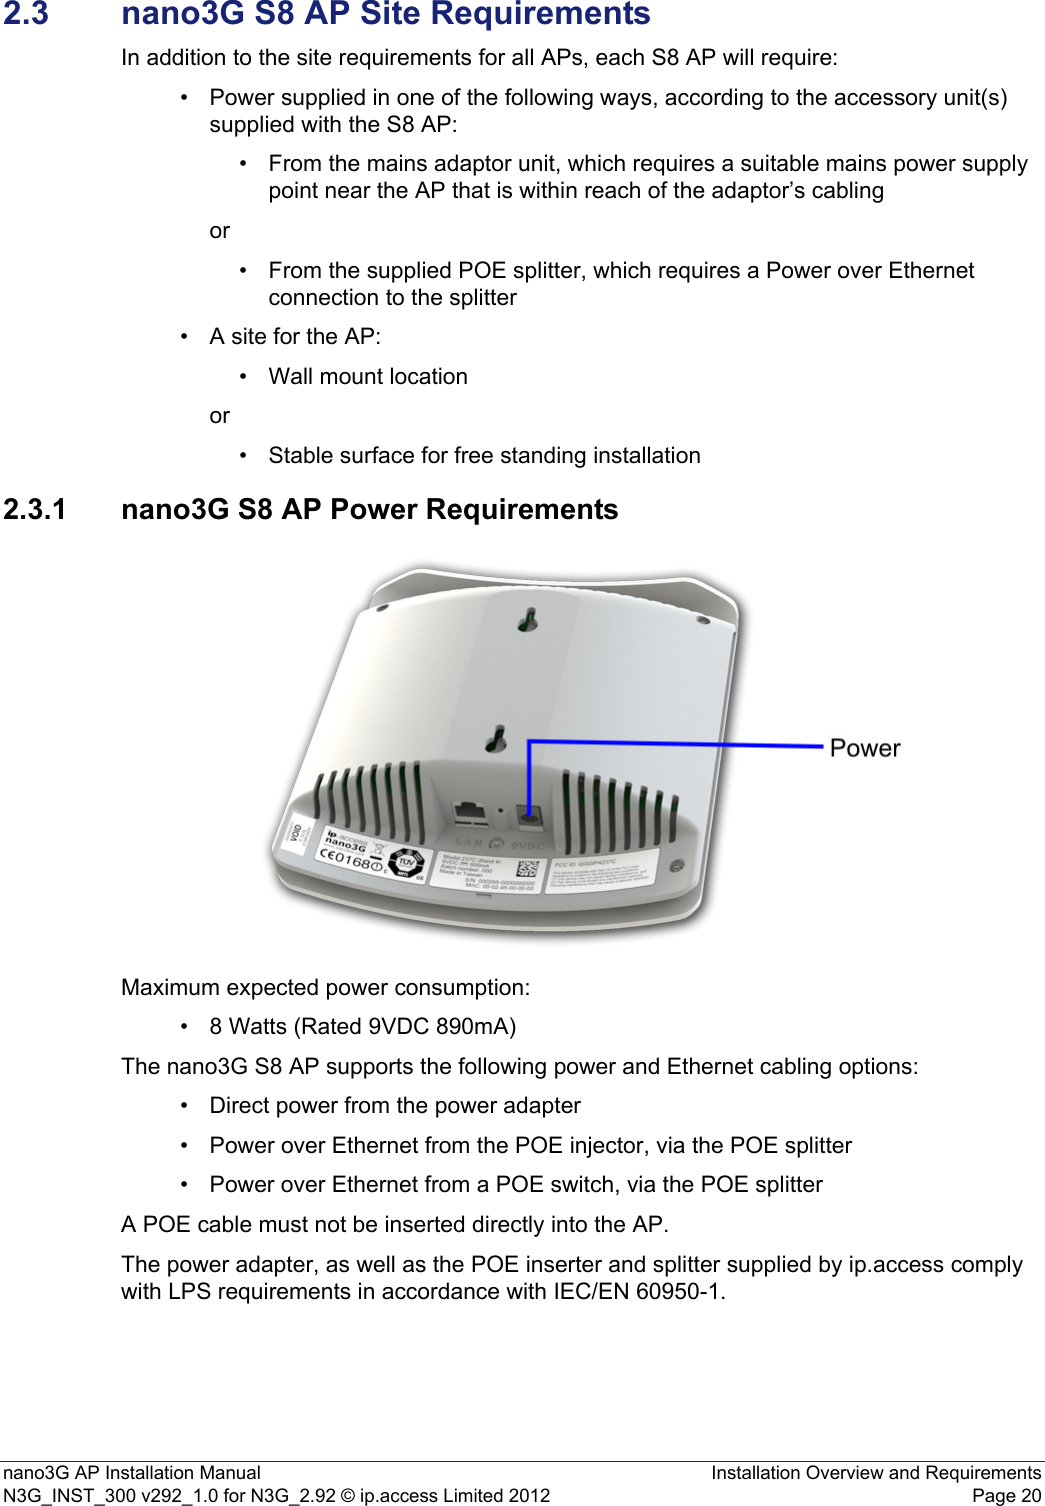 nano3G AP Installation Manual Installation Overview and RequirementsN3G_INST_300 v292_1.0 for N3G_2.92 © ip.access Limited 2012 Page 202.3 nano3G S8 AP Site RequirementsIn addition to the site requirements for all APs, each S8 AP will require:• Power supplied in one of the following ways, according to the accessory unit(s) supplied with the S8 AP:• From the mains adaptor unit, which requires a suitable mains power supply point near the AP that is within reach of the adaptor’s cablingor• From the supplied POE splitter, which requires a Power over Ethernet connection to the splitter • A site for the AP:• Wall mount locationor• Stable surface for free standing installation 2.3.1 nano3G S8 AP Power RequirementsMaximum expected power consumption:• 8 Watts (Rated 9VDC 890mA)The nano3G S8 AP supports the following power and Ethernet cabling options:• Direct power from the power adapter• Power over Ethernet from the POE injector, via the POE splitter• Power over Ethernet from a POE switch, via the POE splitterA POE cable must not be inserted directly into the AP.The power adapter, as well as the POE inserter and splitter supplied by ip.access comply with LPS requirements in accordance with IEC/EN 60950-1.